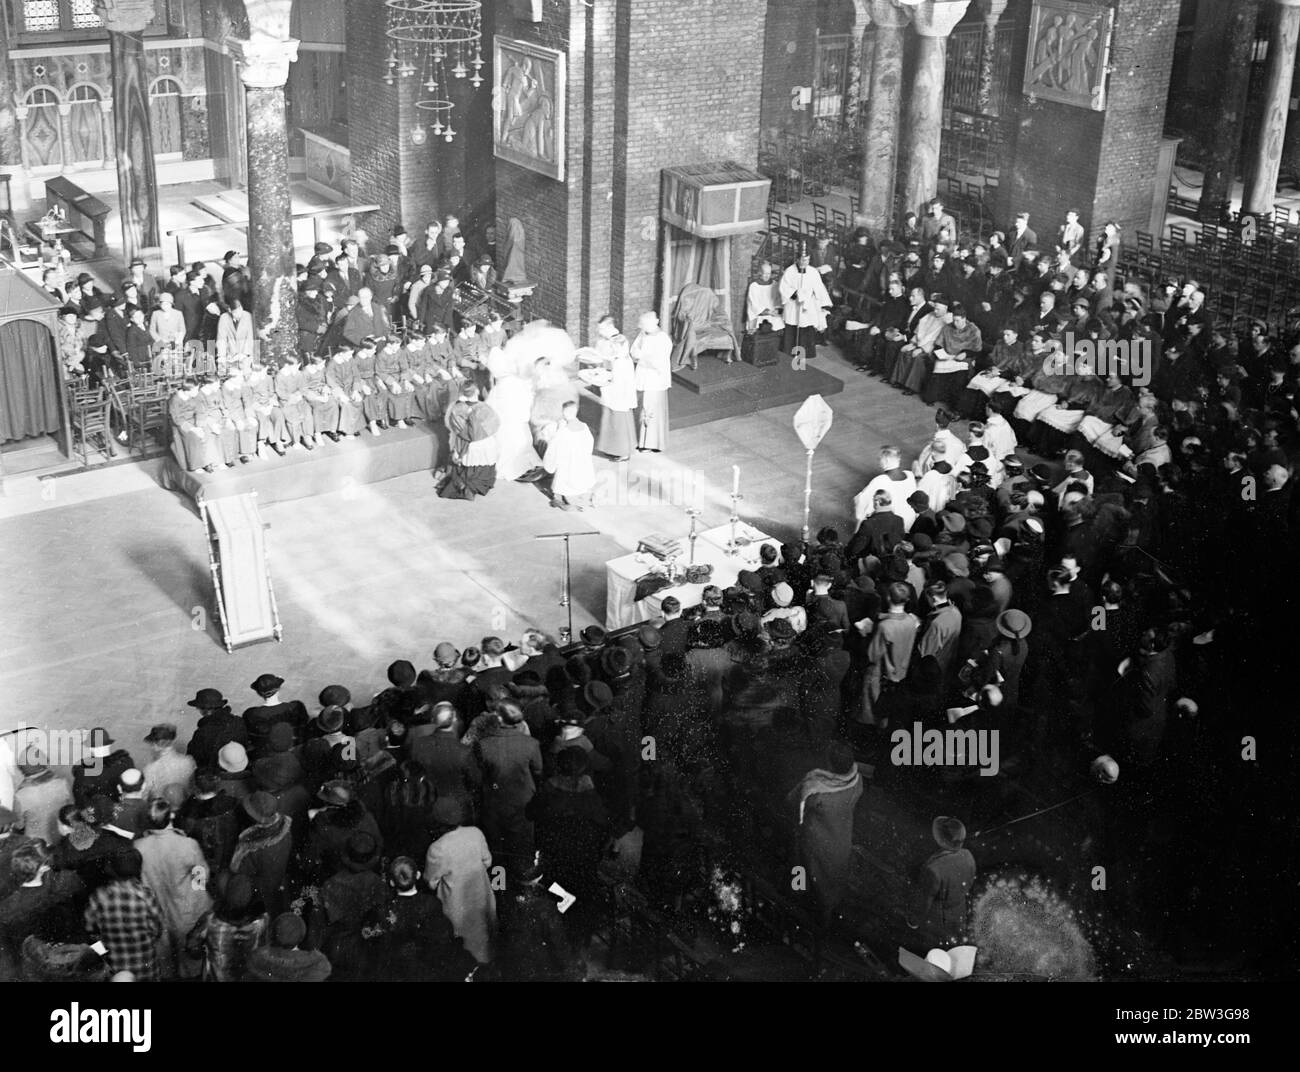 Cardinal Hinsley washes feet of 12 choirboys at Westminster Cathedral . Cardinal Hinsley , Roman Catholic Archbishop of Westminster washed the feet of 12 choirboys at Westminster Cathedral , London , during the Easter Mondation ceremony . This commemorates the act of the Saviour in washing the feet of the apostles . Photo shows a general view of the ceremony showing Cardinal Hinsley washing the choirboys feet . 10 April 1936 Stock Photo